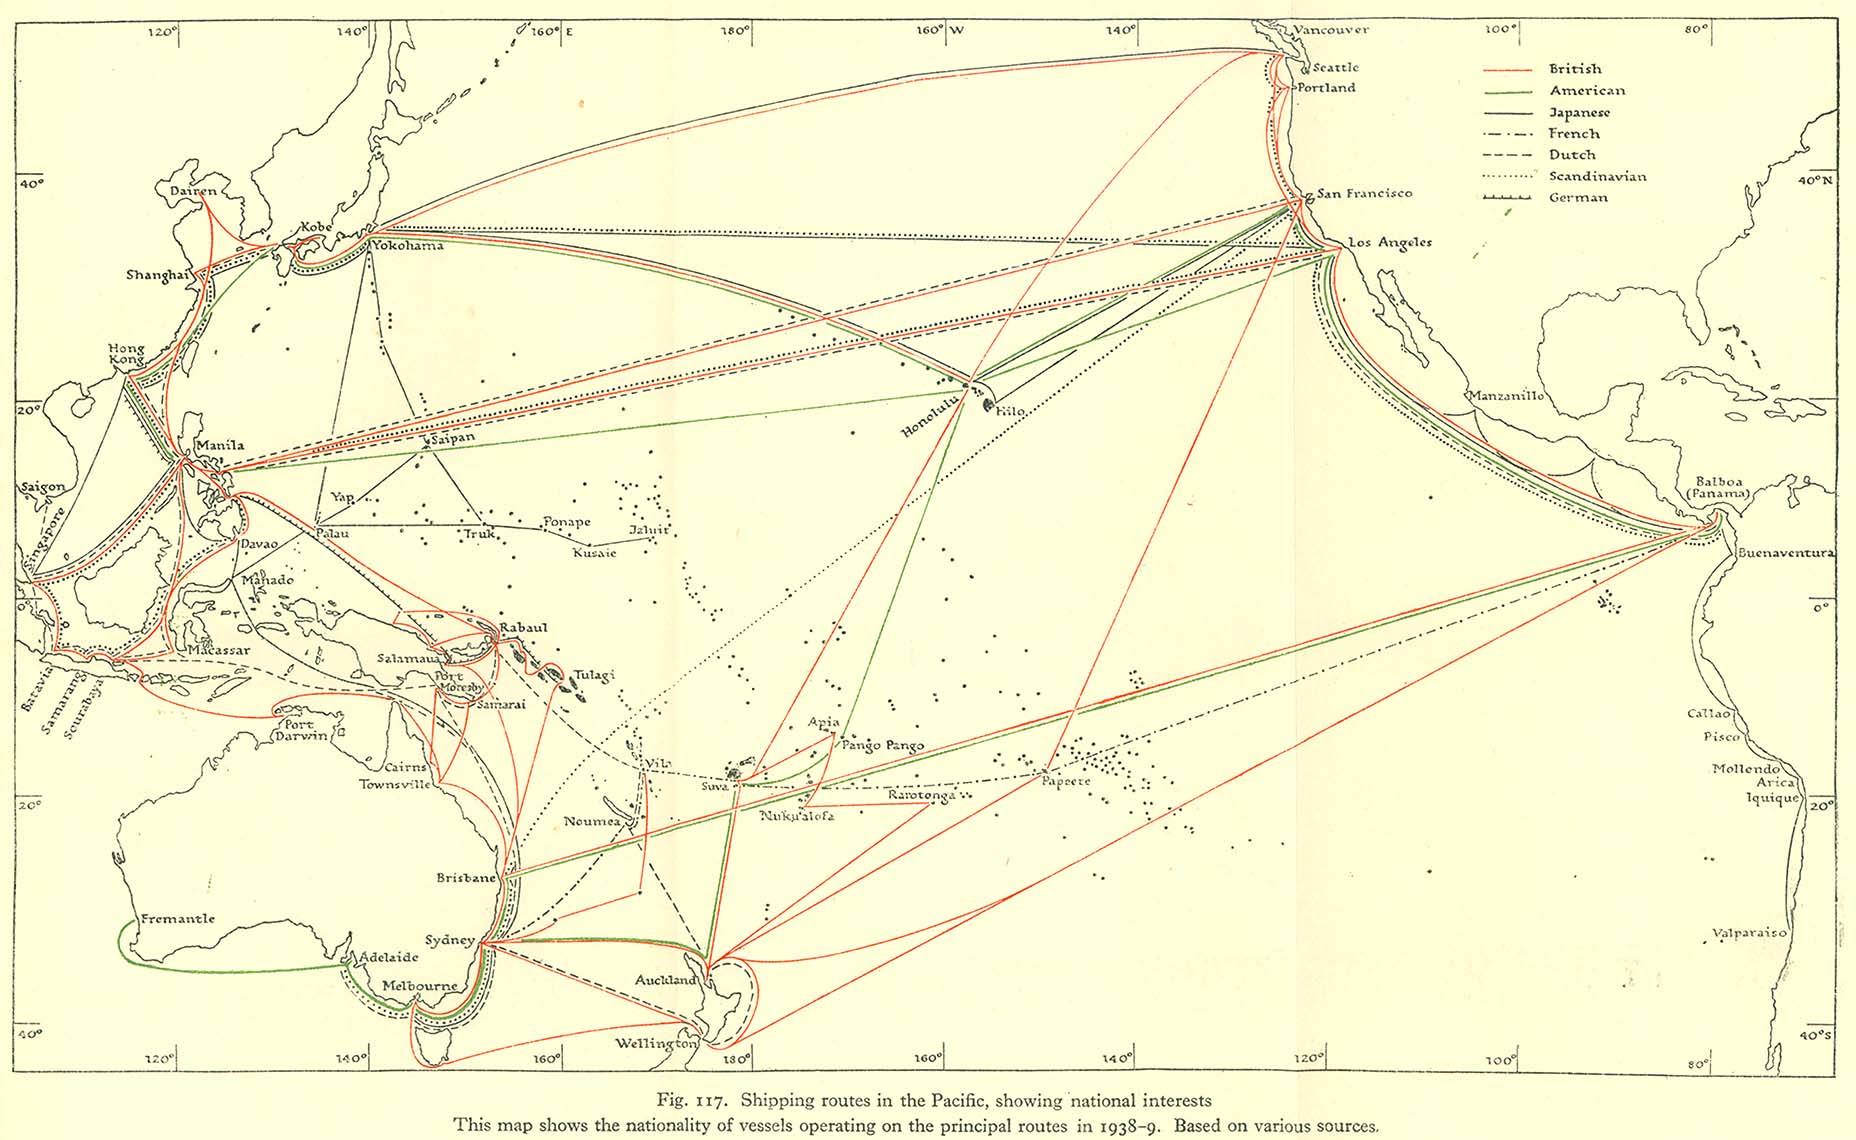 http://www.lib.utexas.edu/maps/historical/pacific_islands_1943_1945/shipping_routes_national_interest.jpg